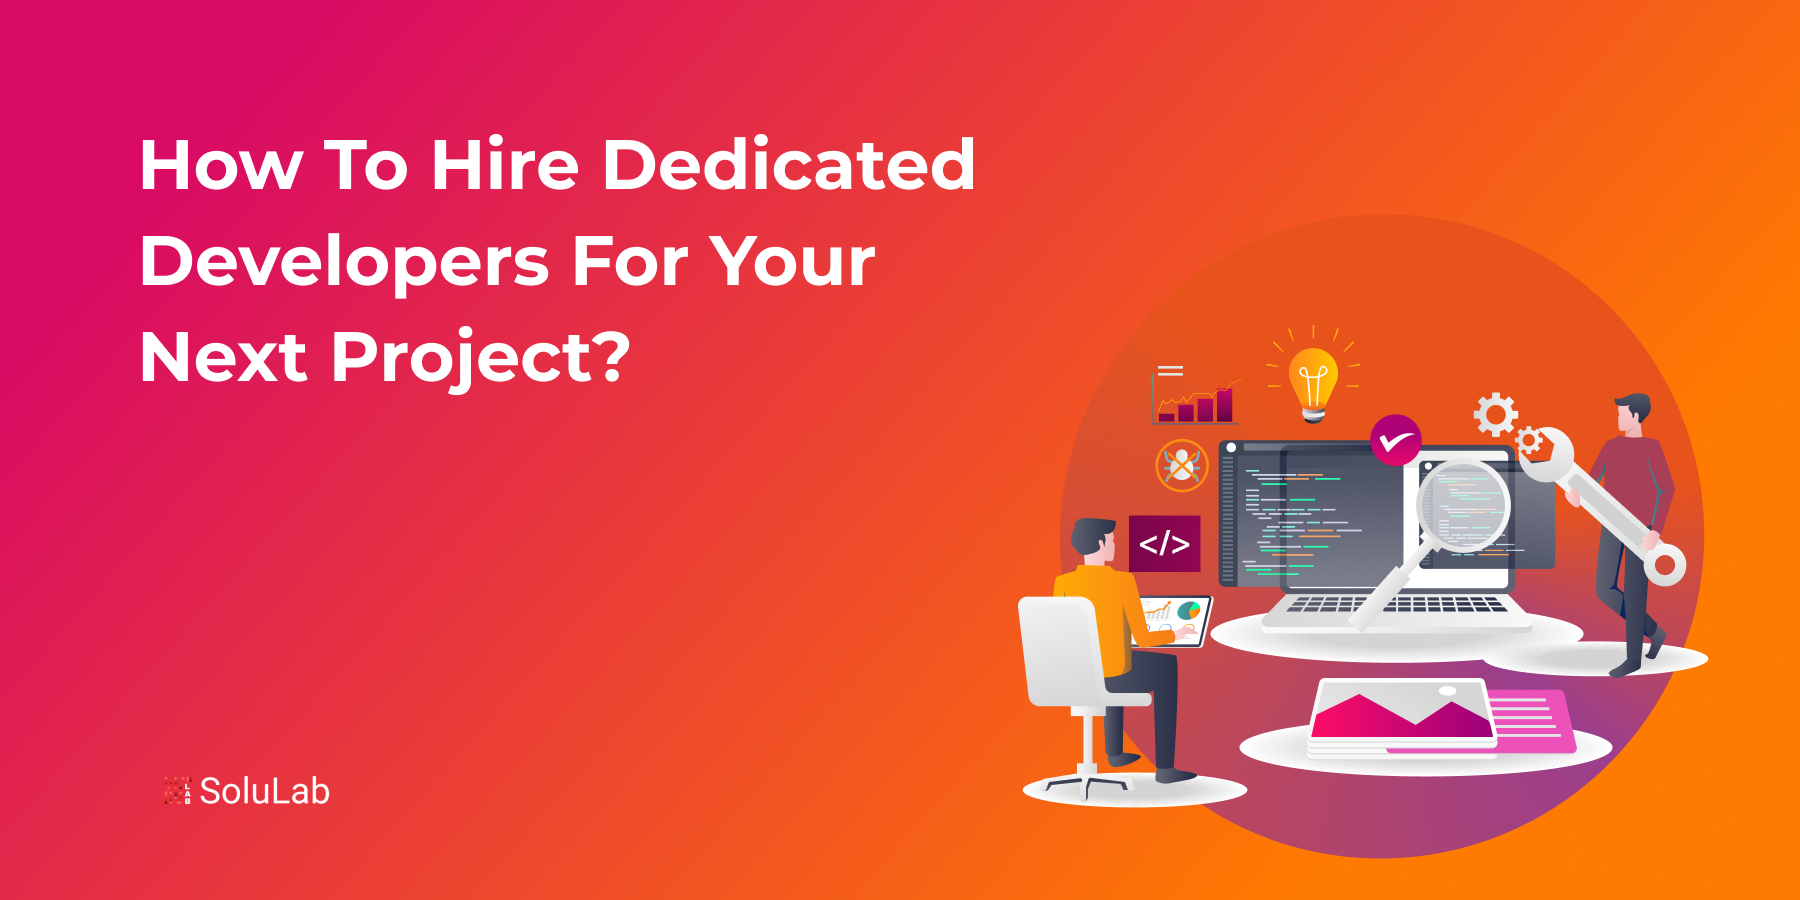 How to Hire Dedicated Developers For Your Next Project?